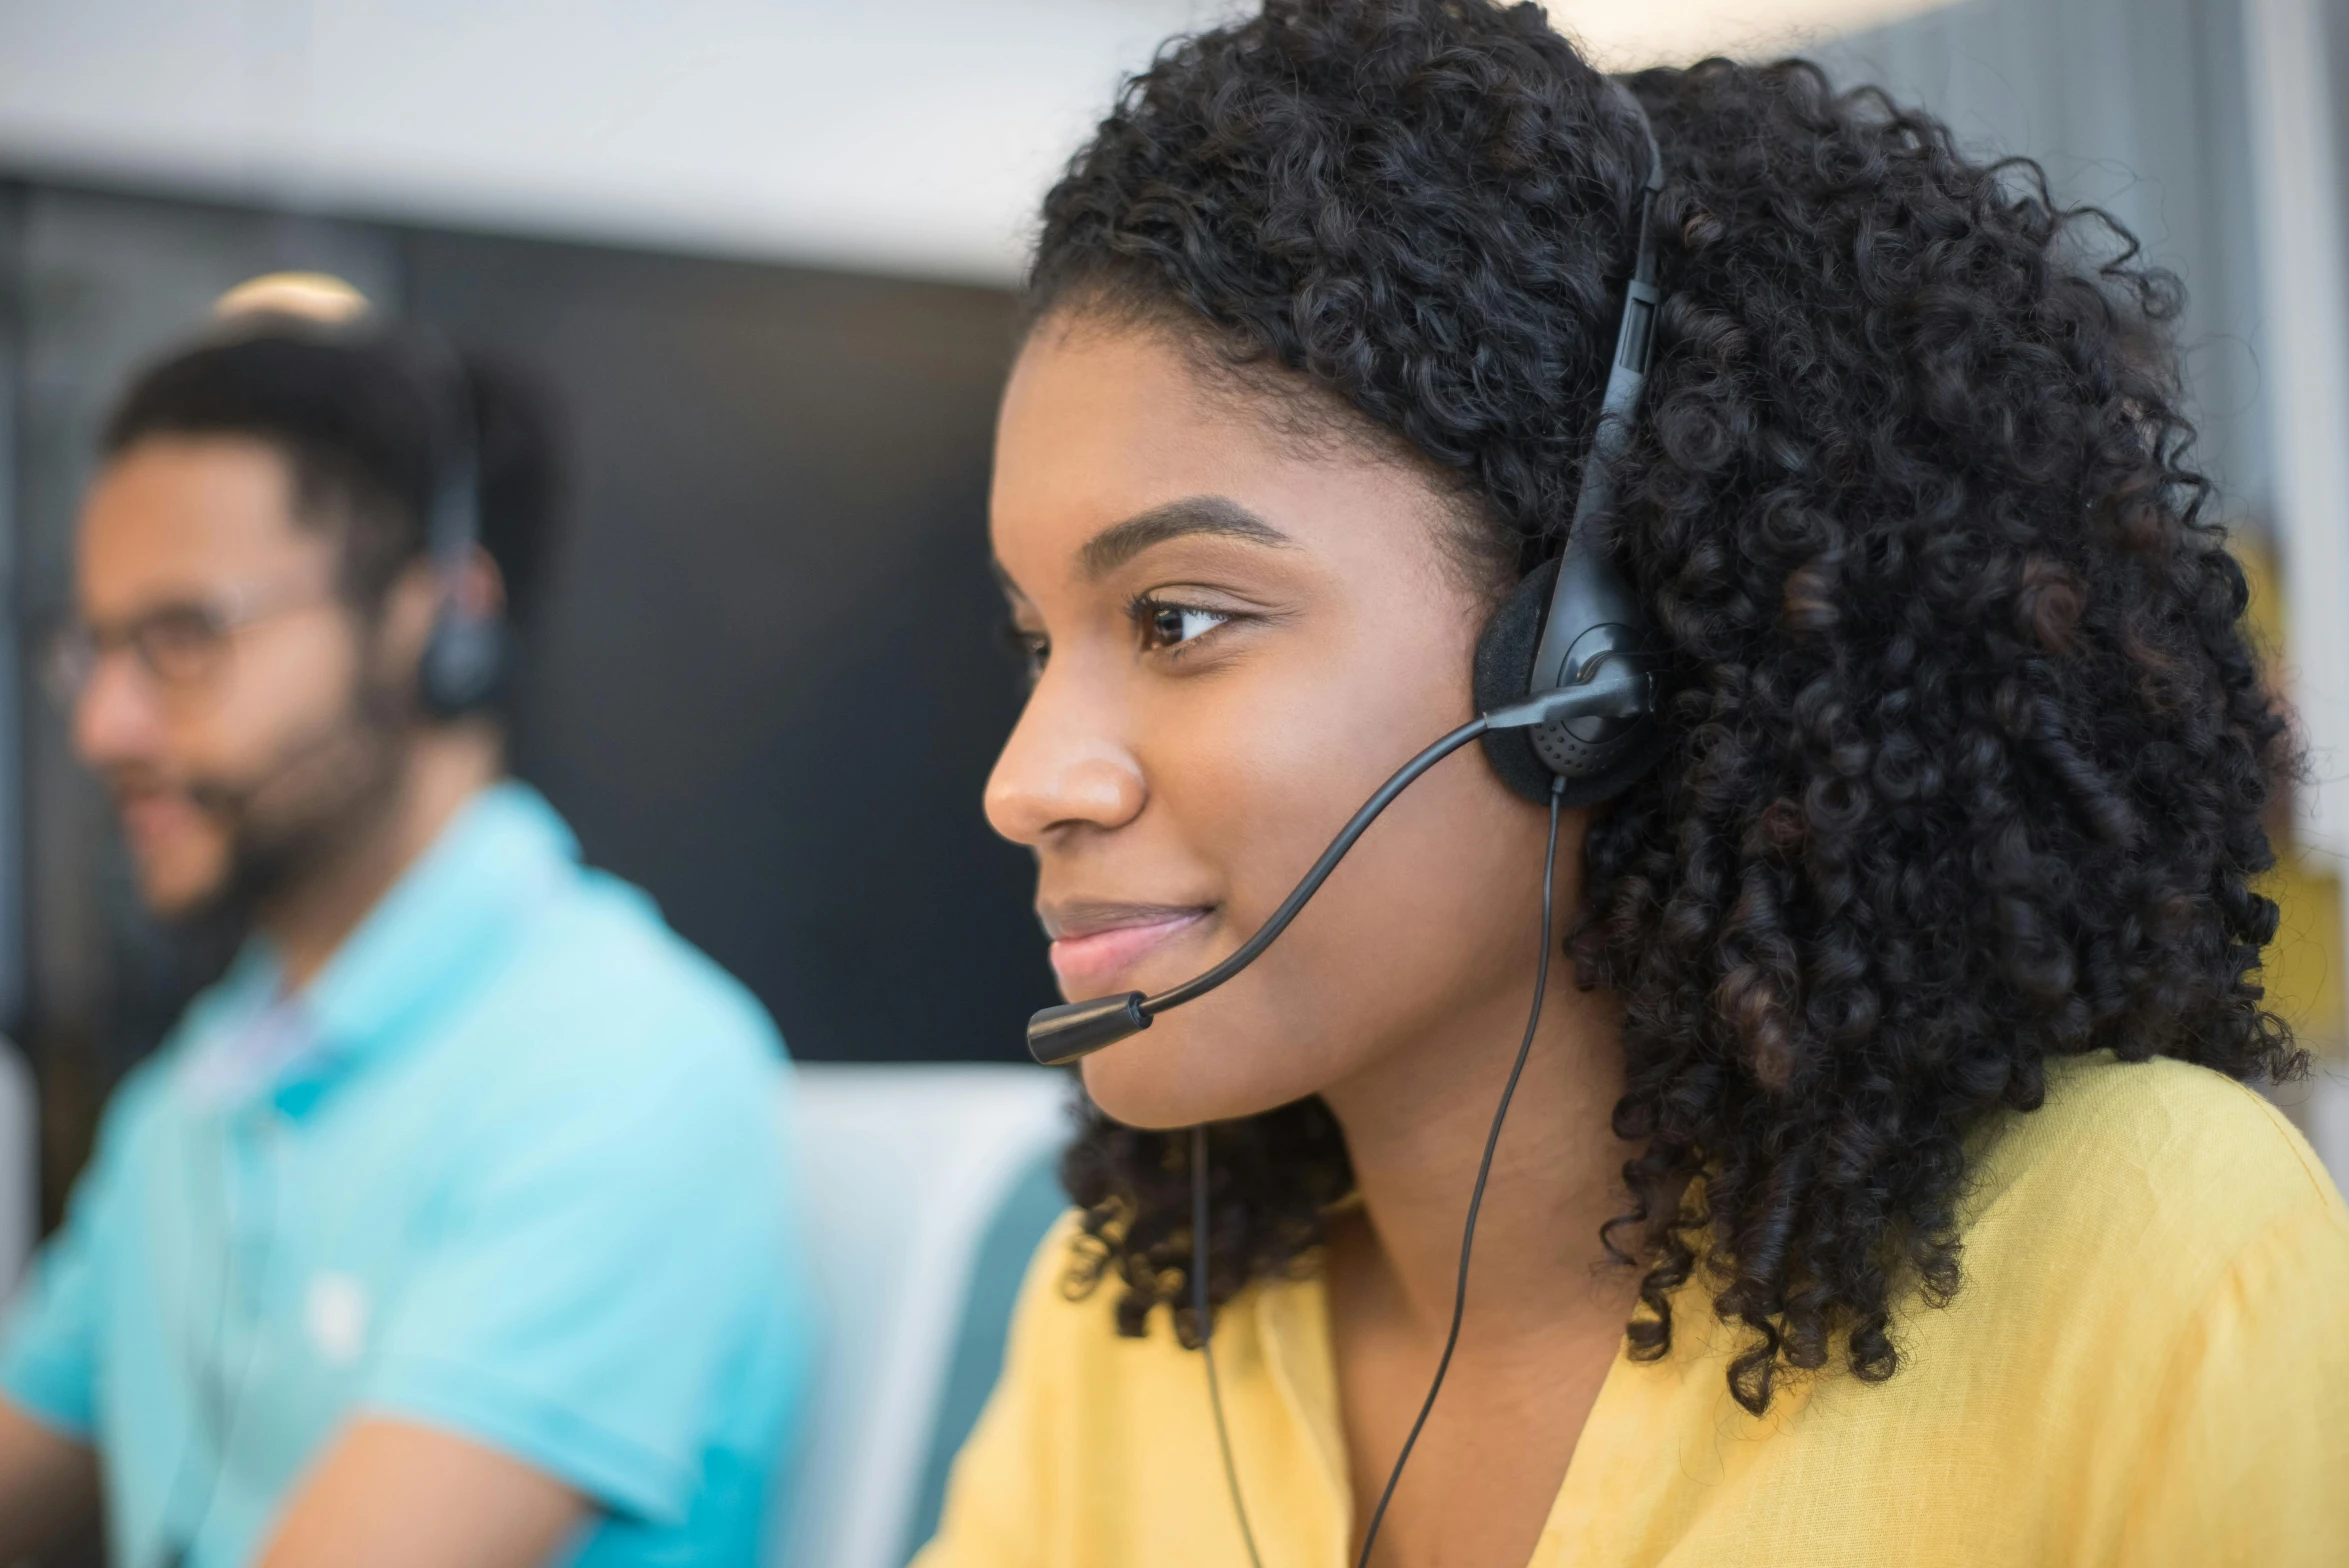 a young black woman using a headset in an office